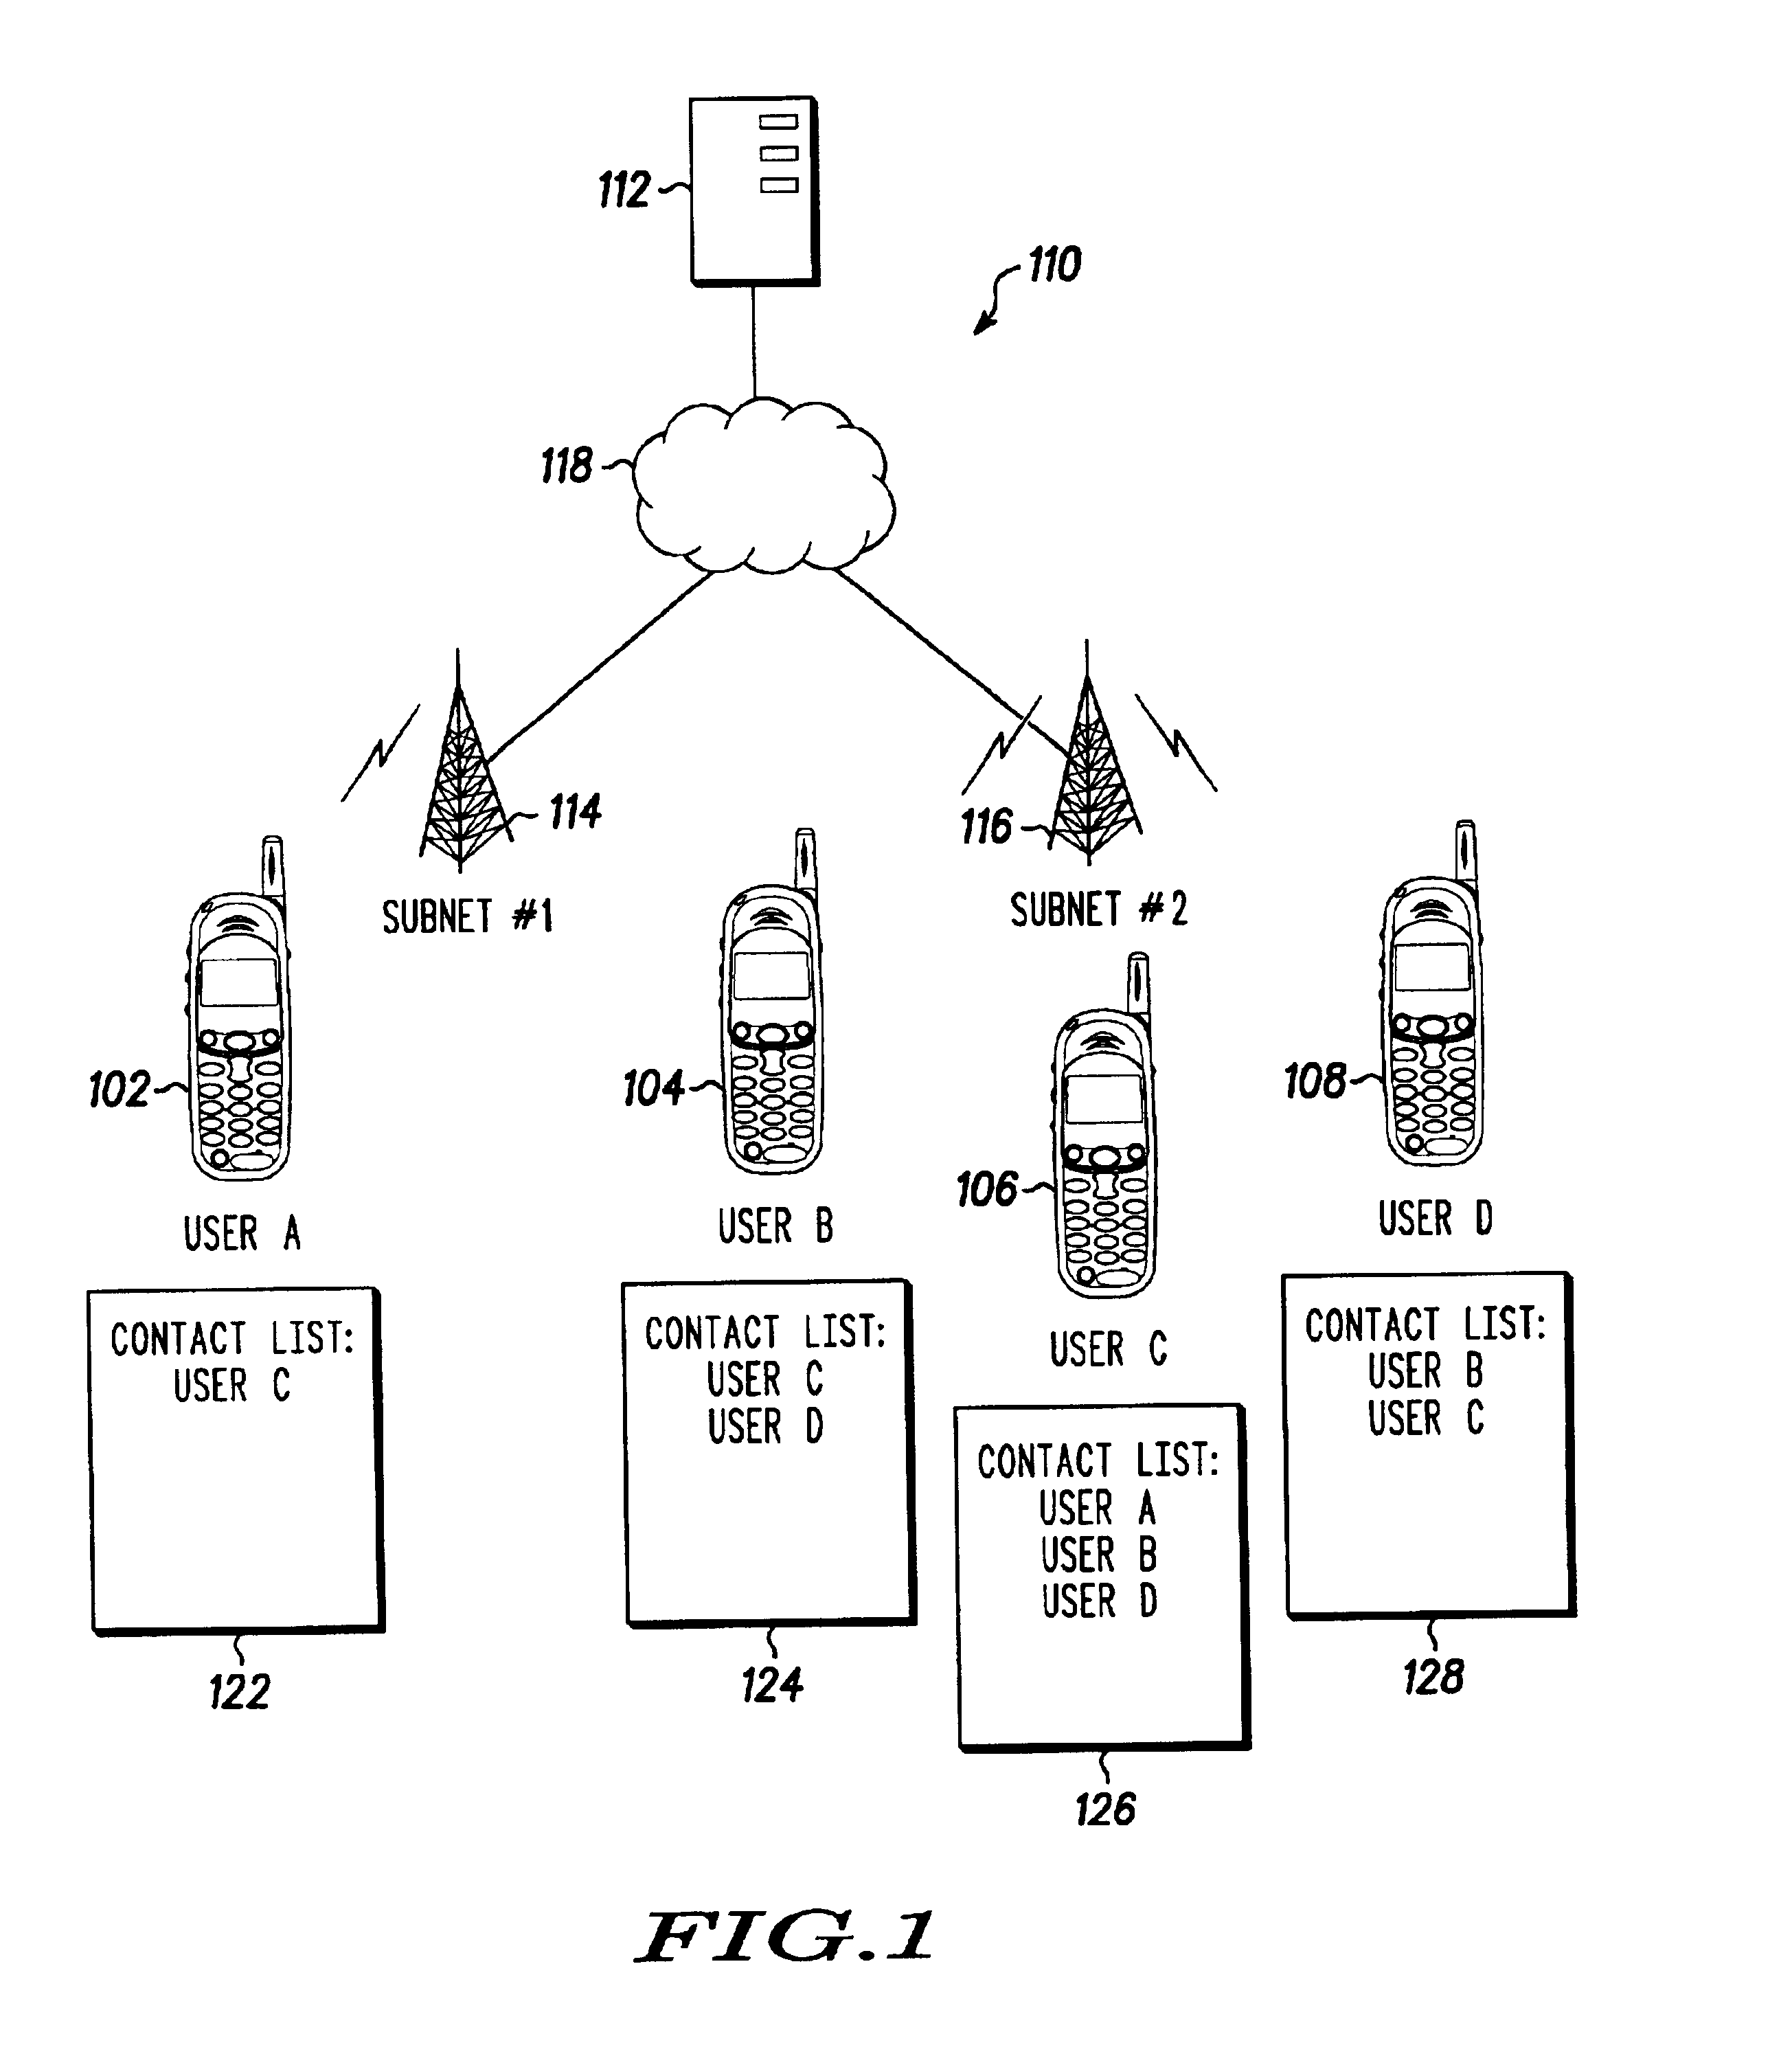 Multicast distribution of presence information for an instant messaging system